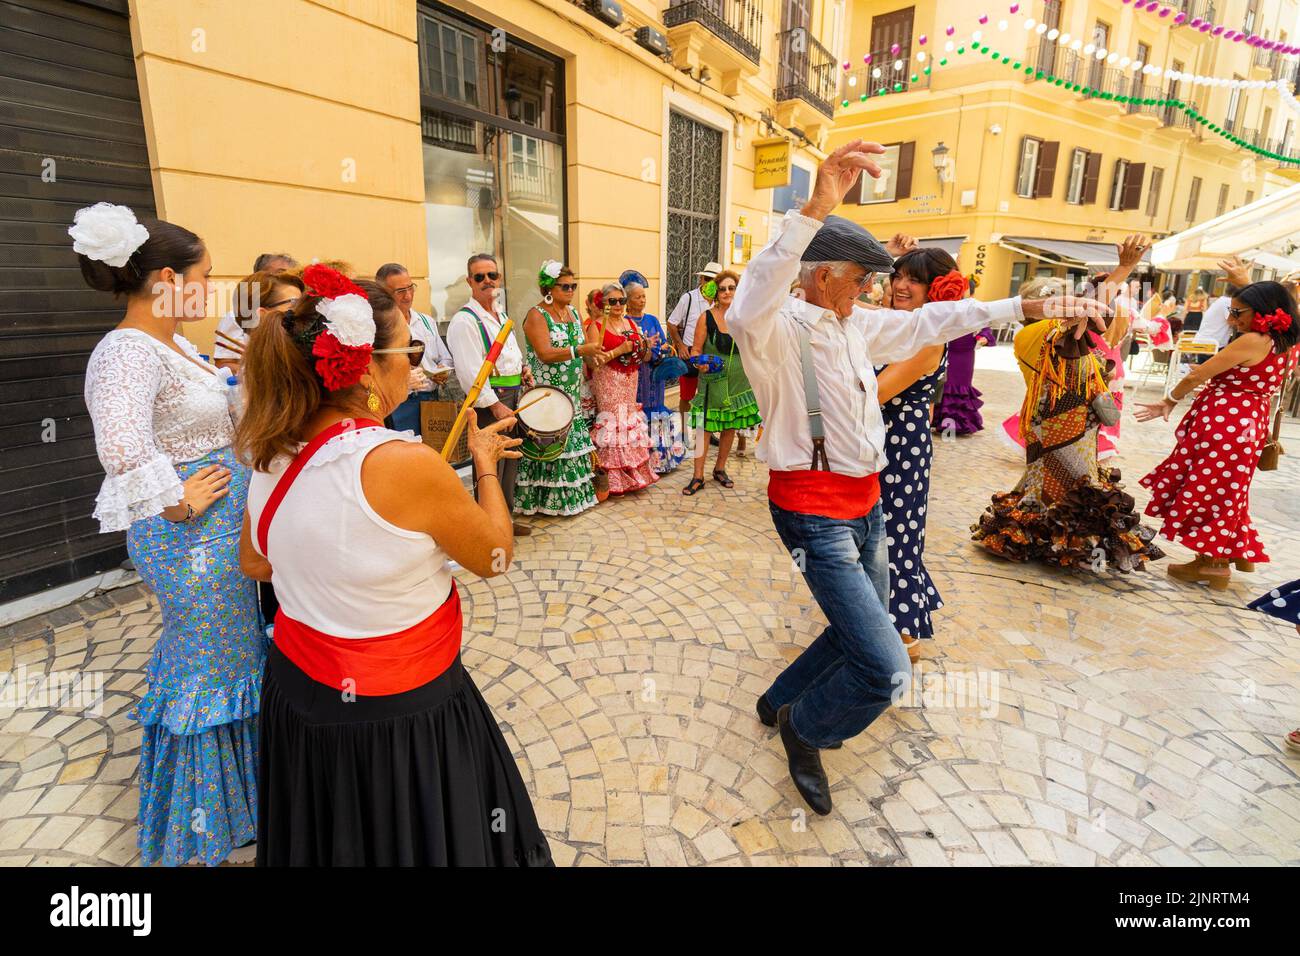 People seen dancing flamenco on the street during the first day of Malaga's Fair 2022. The Fair is being held for the first time since 2019. The 2020 and 2021 editions were suspended due to Covid19 pandemic. Stock Photo